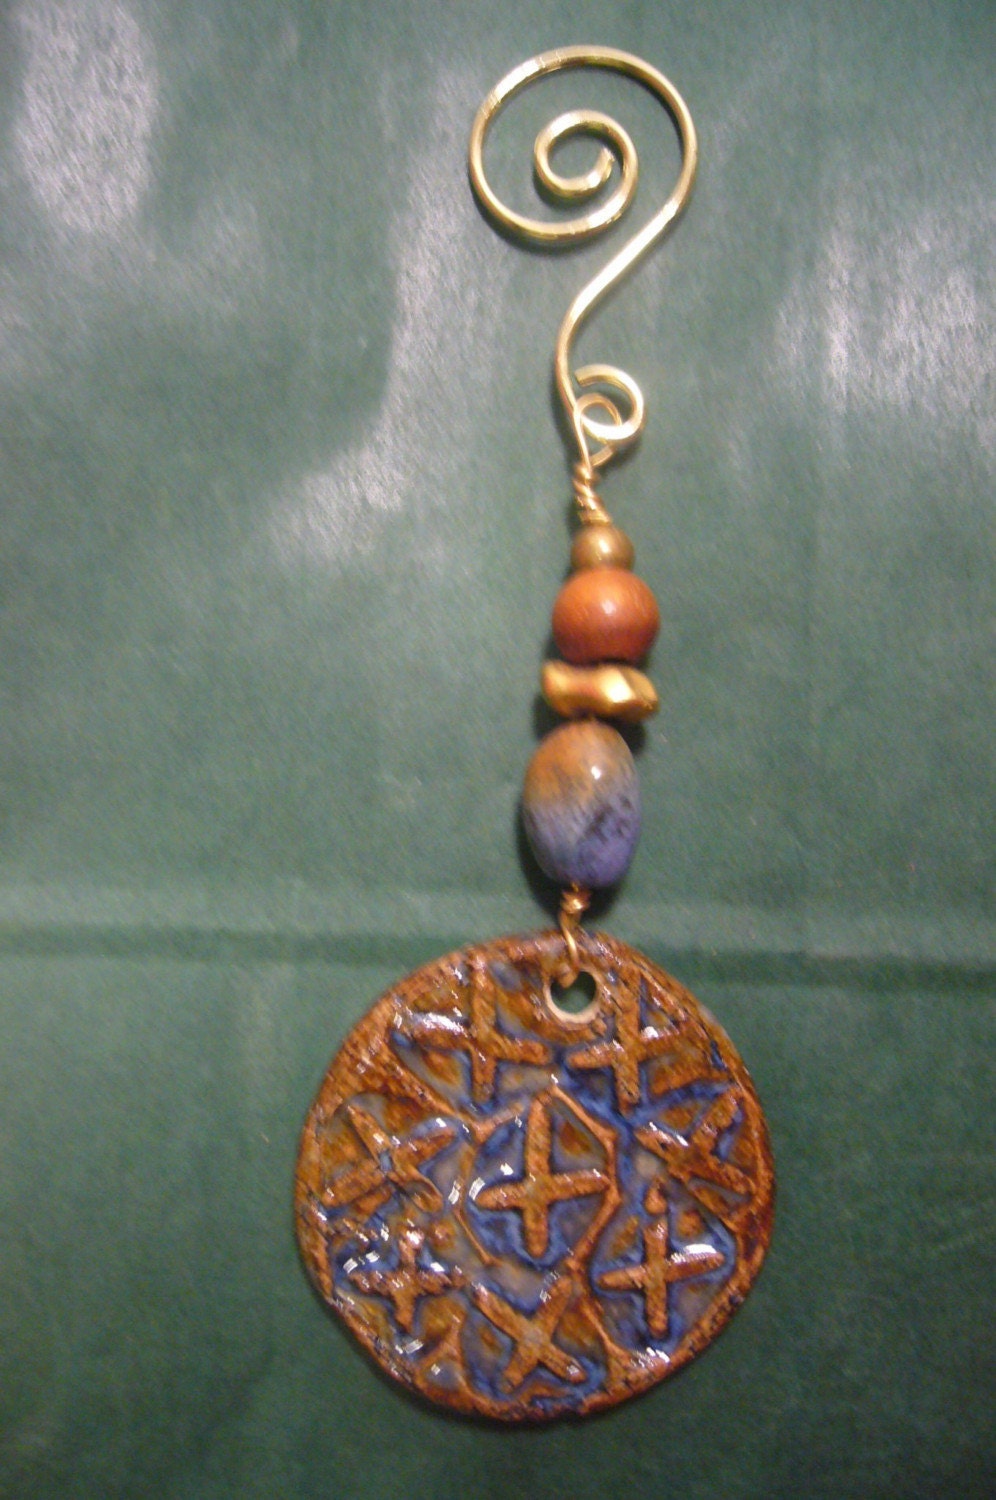 NEW 5 inch Christmas ornament with hand made ceramic pendant by the muddy muse